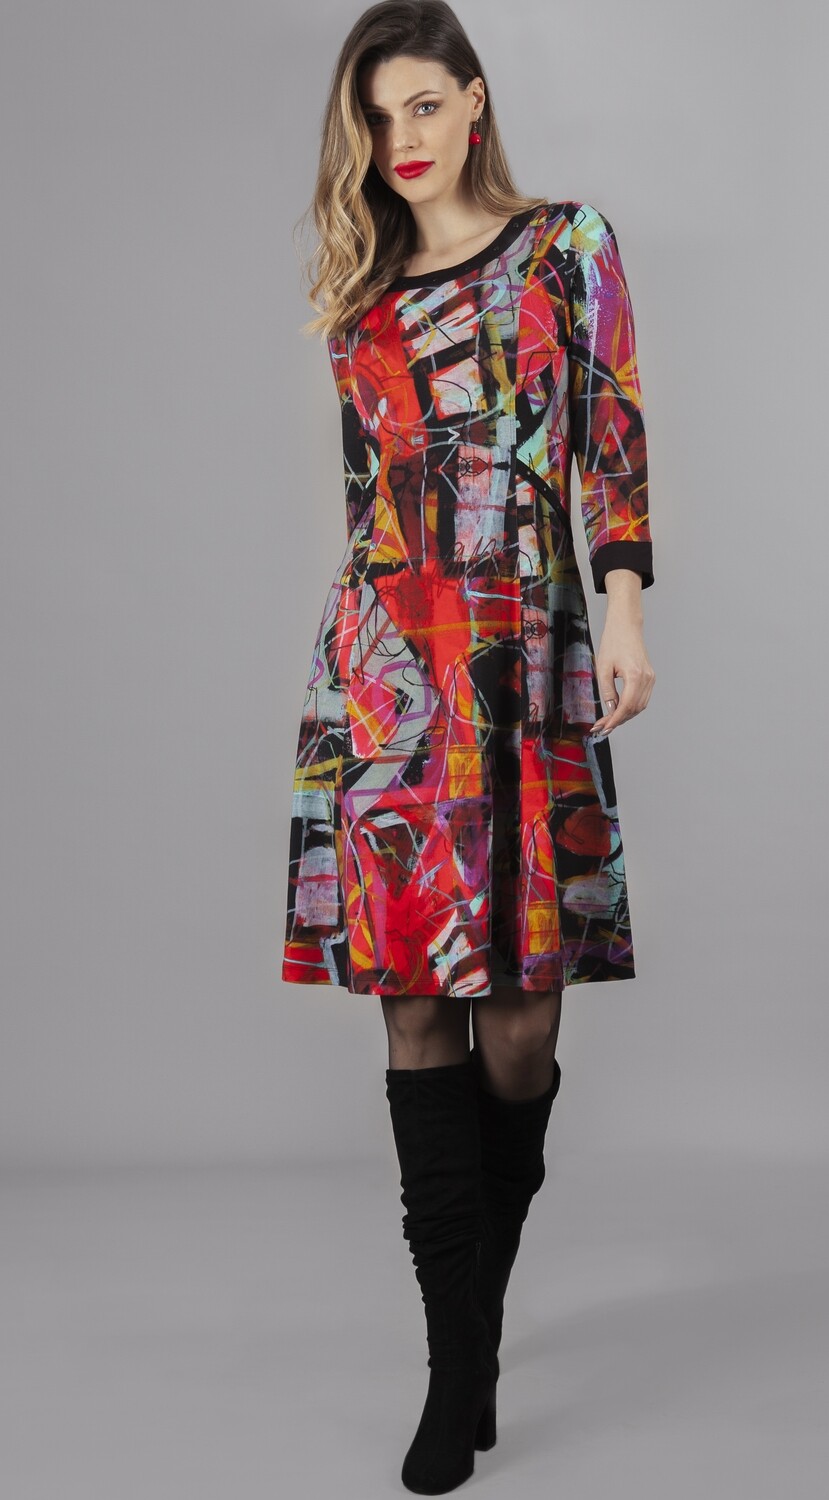 Simply Art Dolcezza: Red 3 Graffiti Abstract Art Flared Dress SOLD OUT